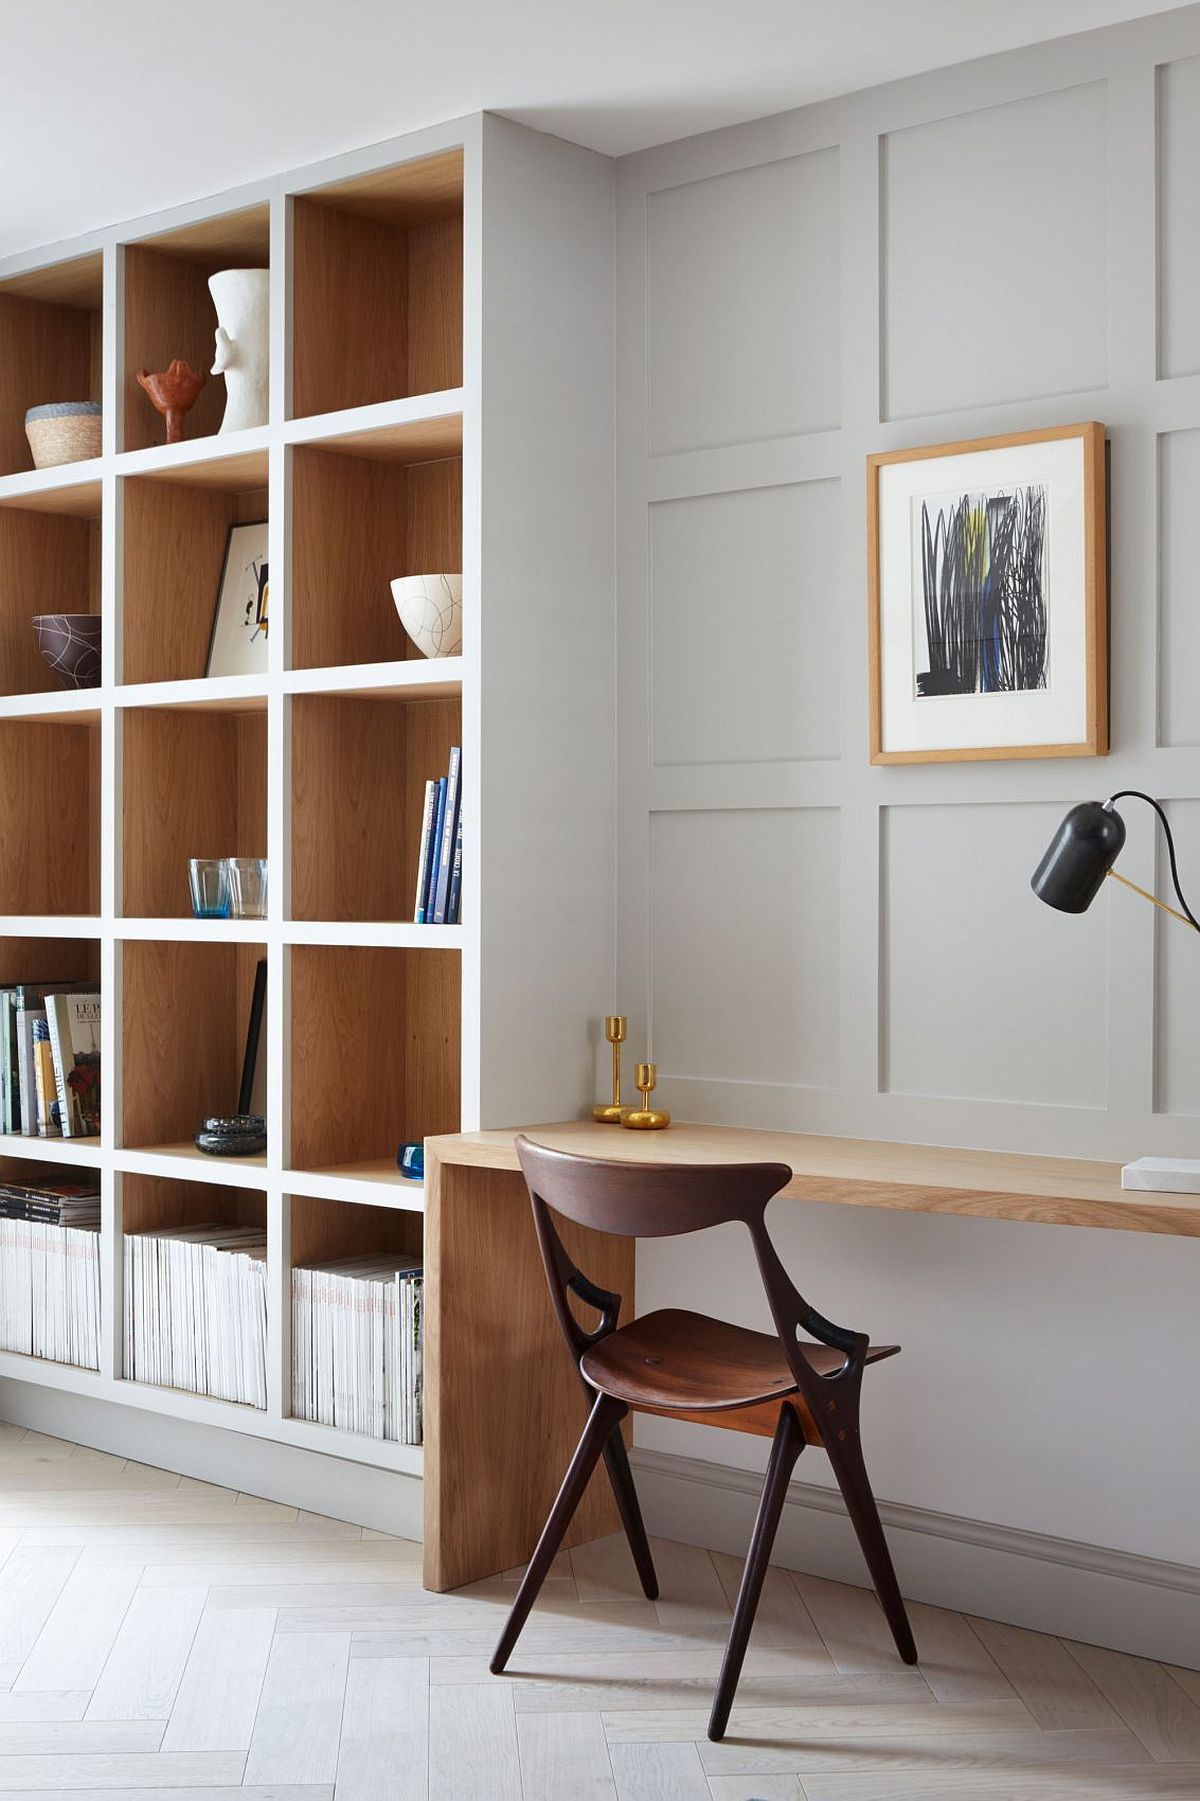 Home workspace and shelving space with sleek wooden desk